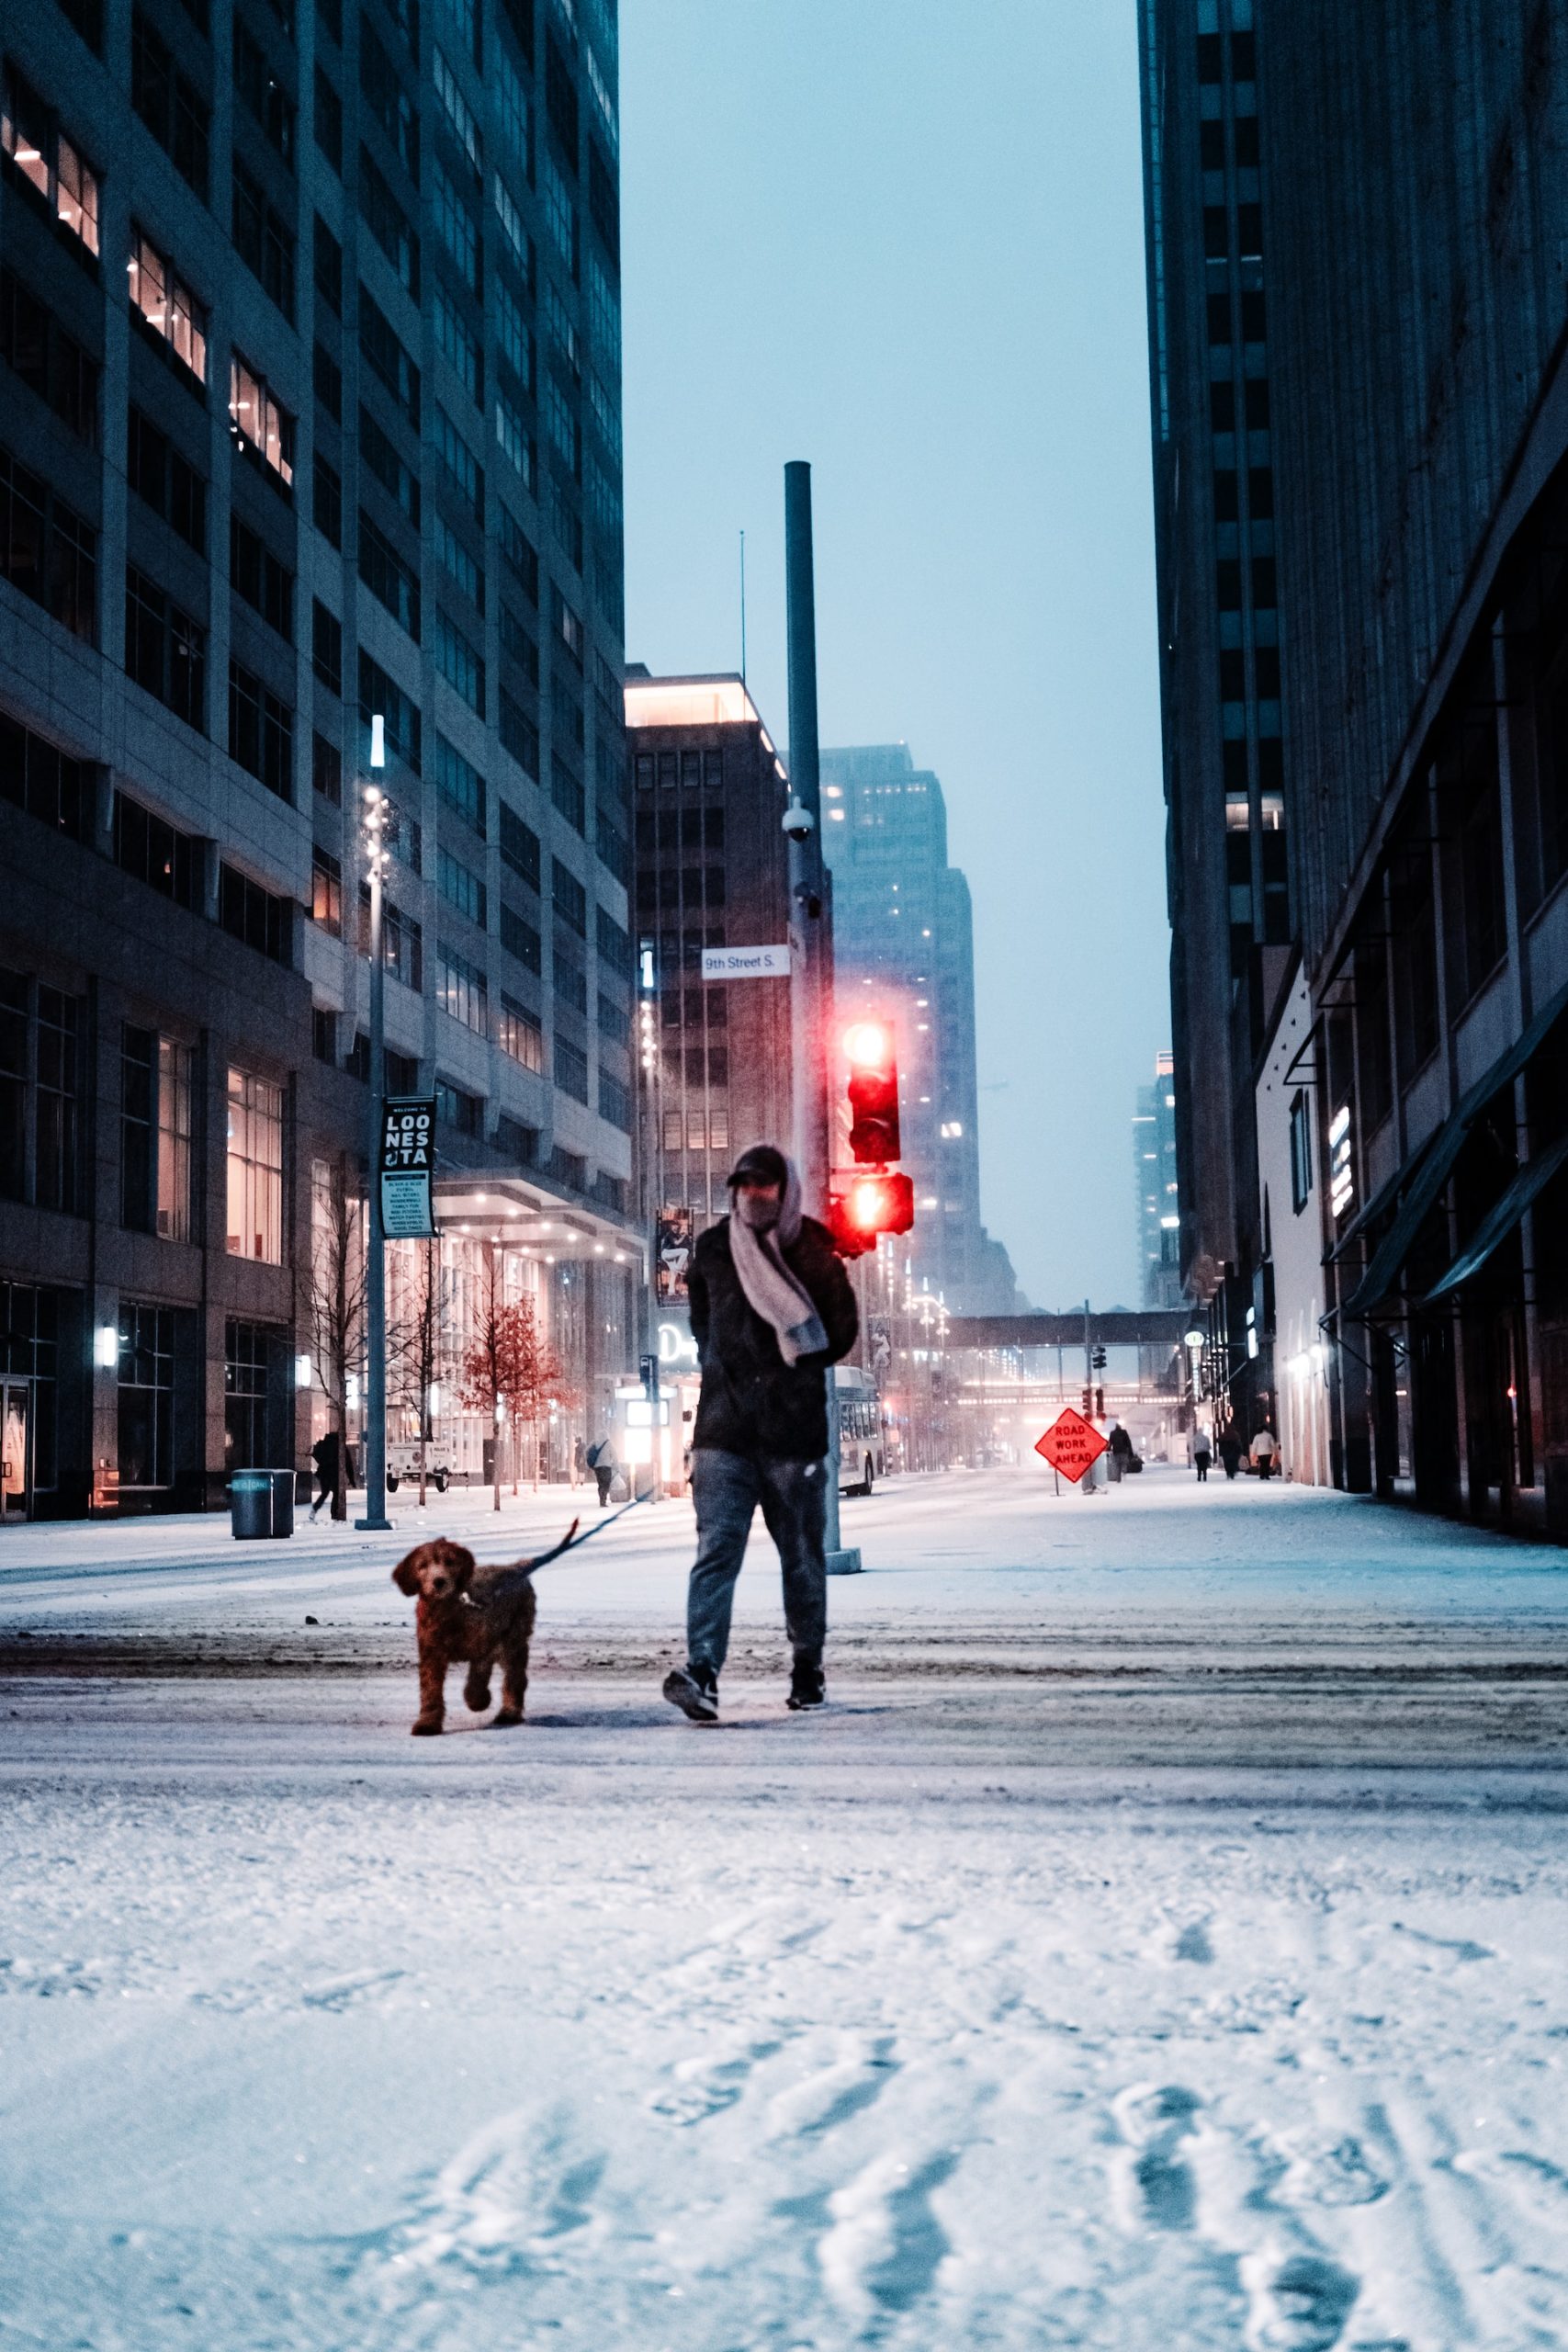 Man and his dog walking on a snow covered street in a city